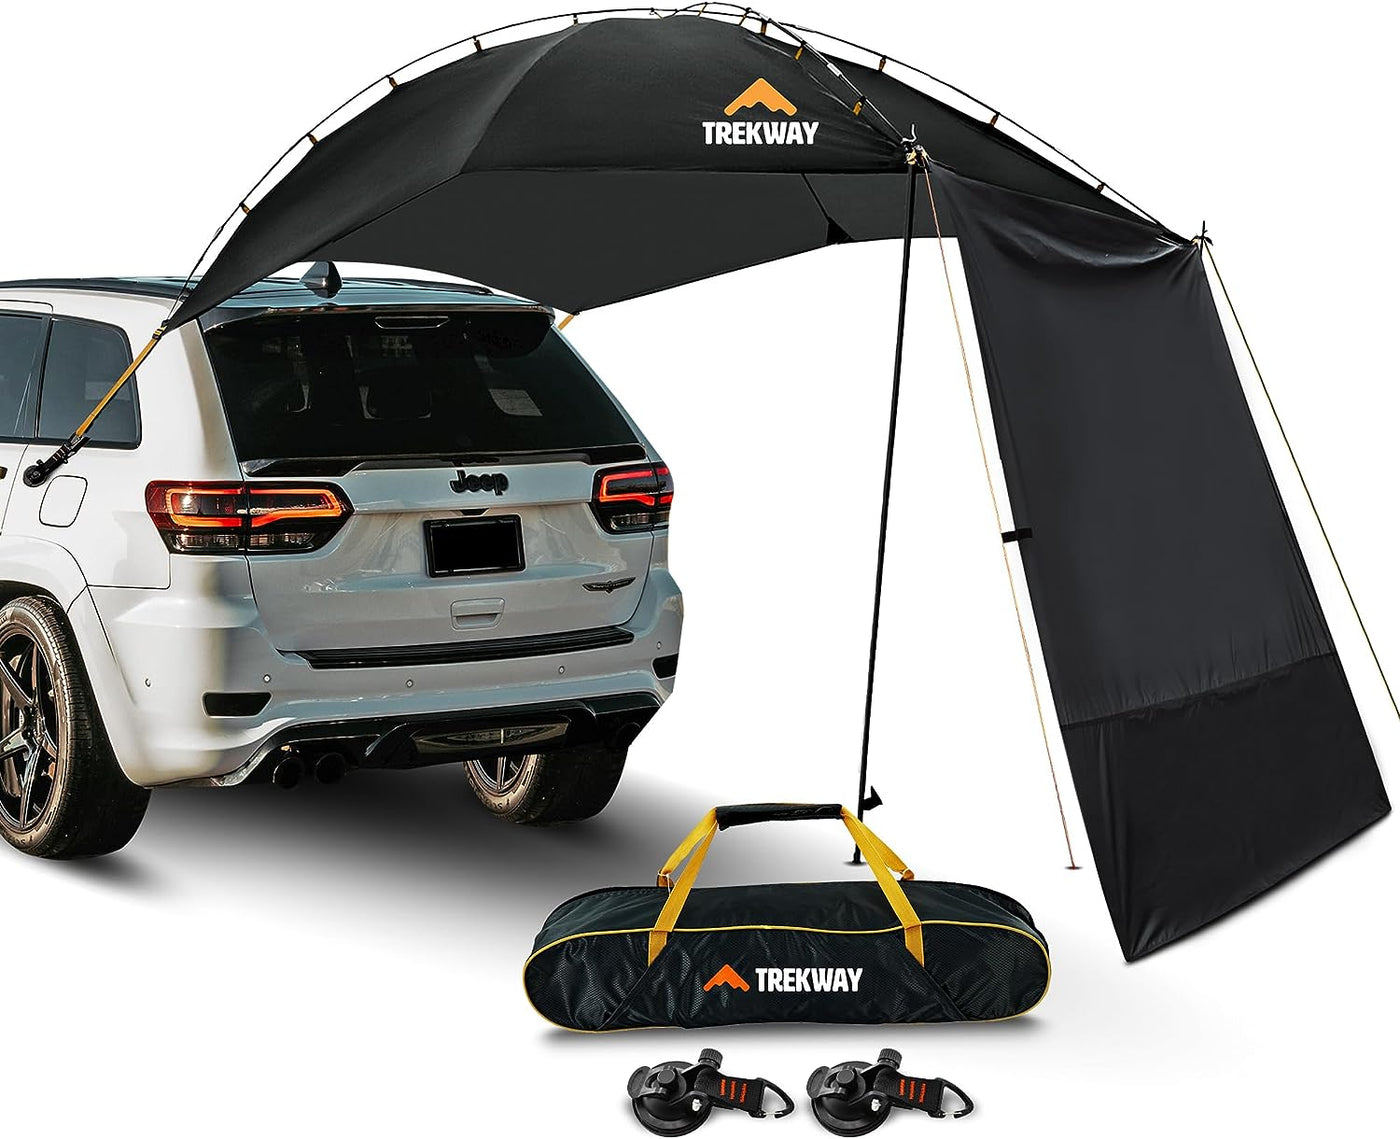 Offroading Gear Portable Awning/Canopy/Sun Shade with Privacy Wall for